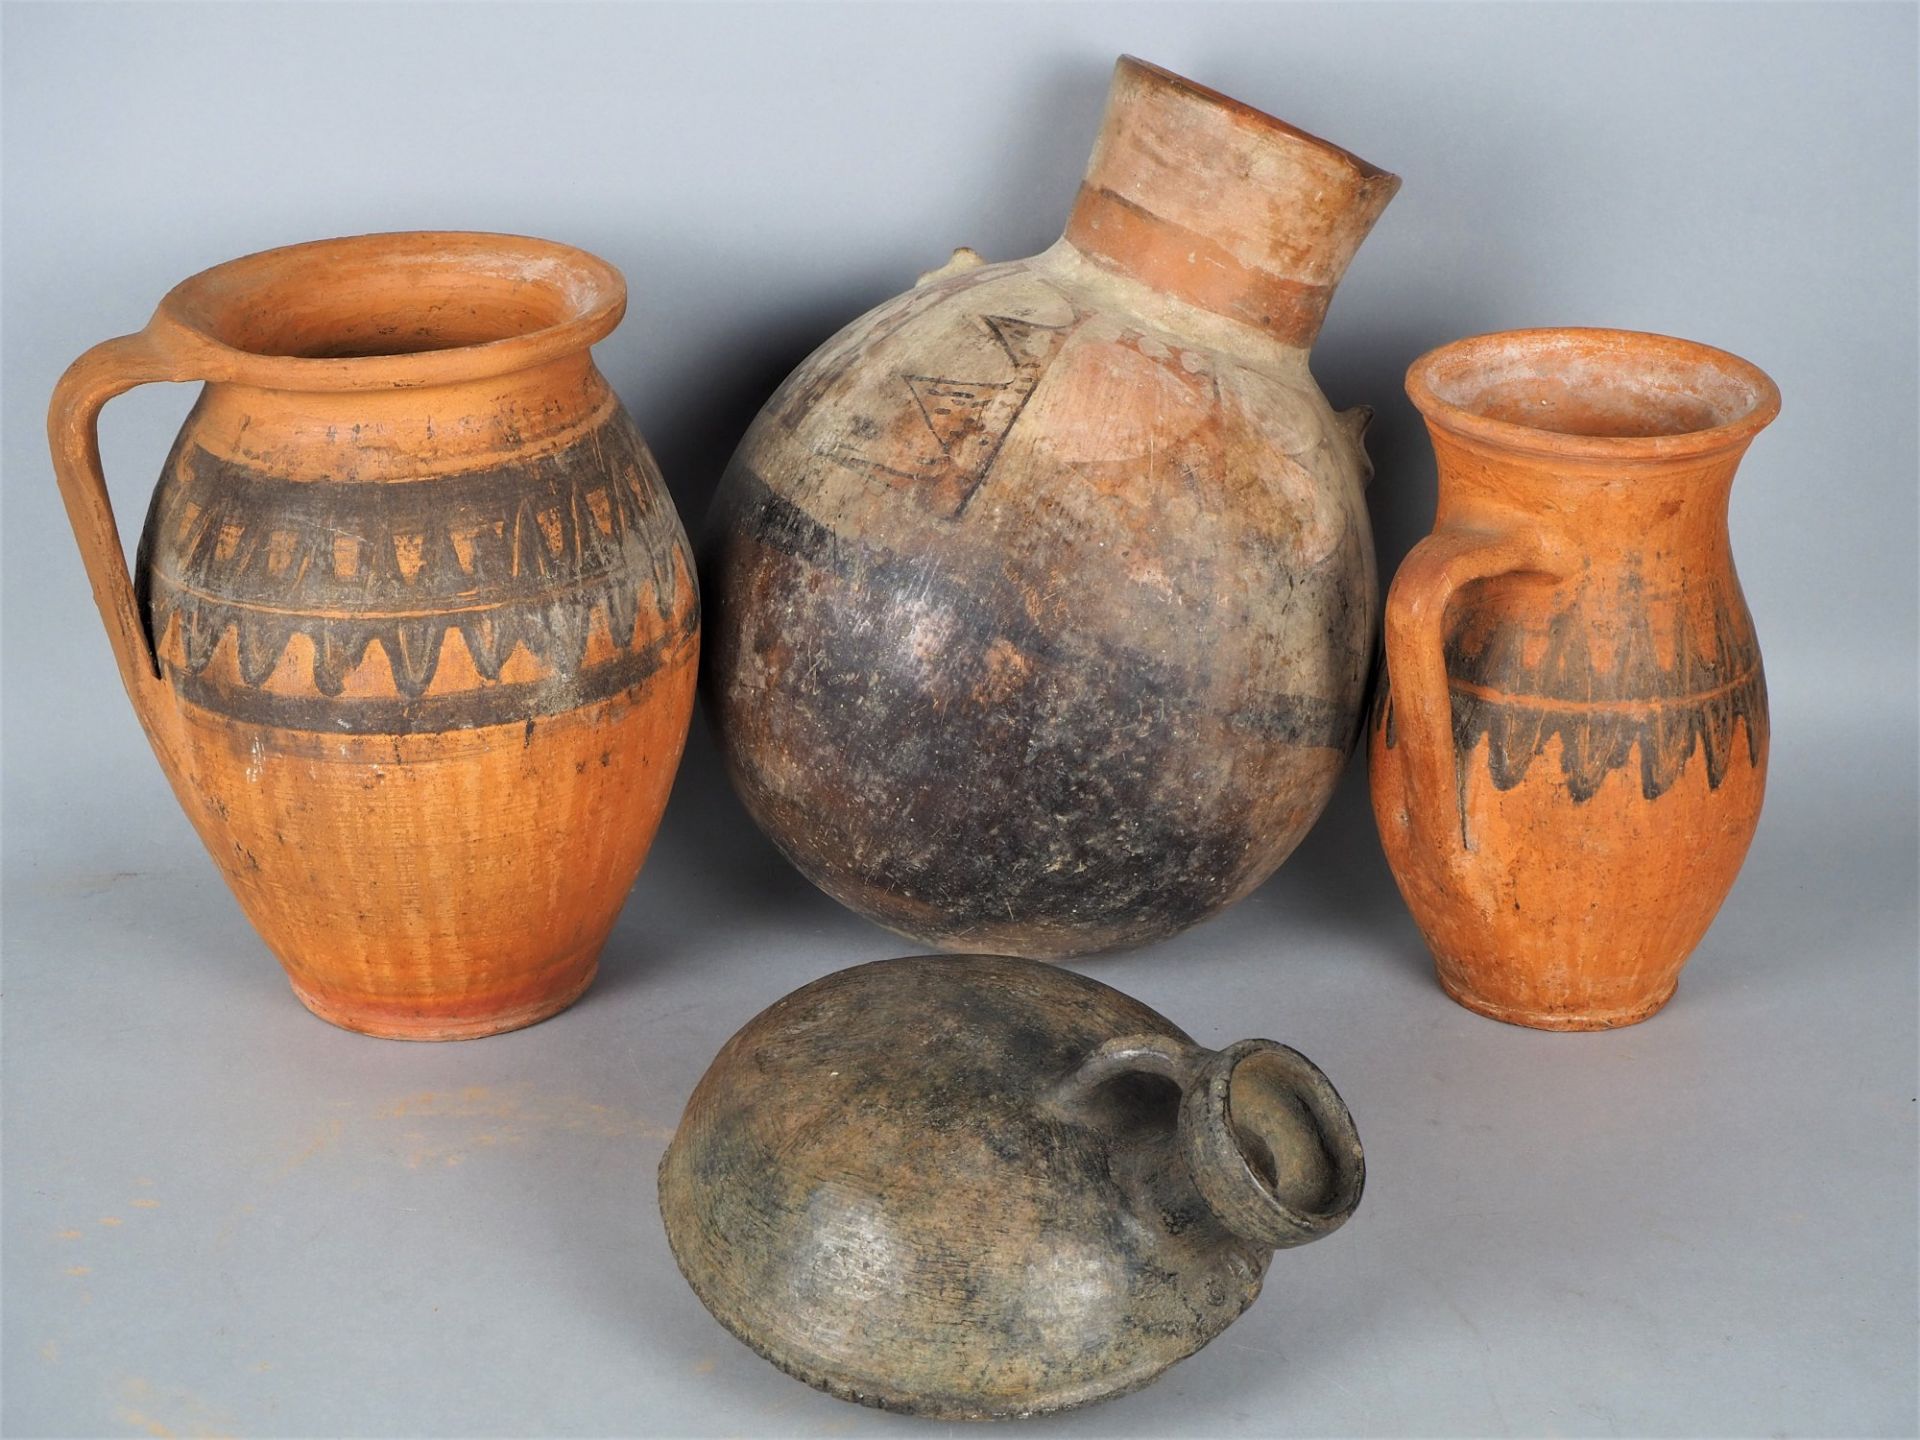 Mixed lot of South American clay vessels (13 pieces), Ecuador/Peru - Image 2 of 8